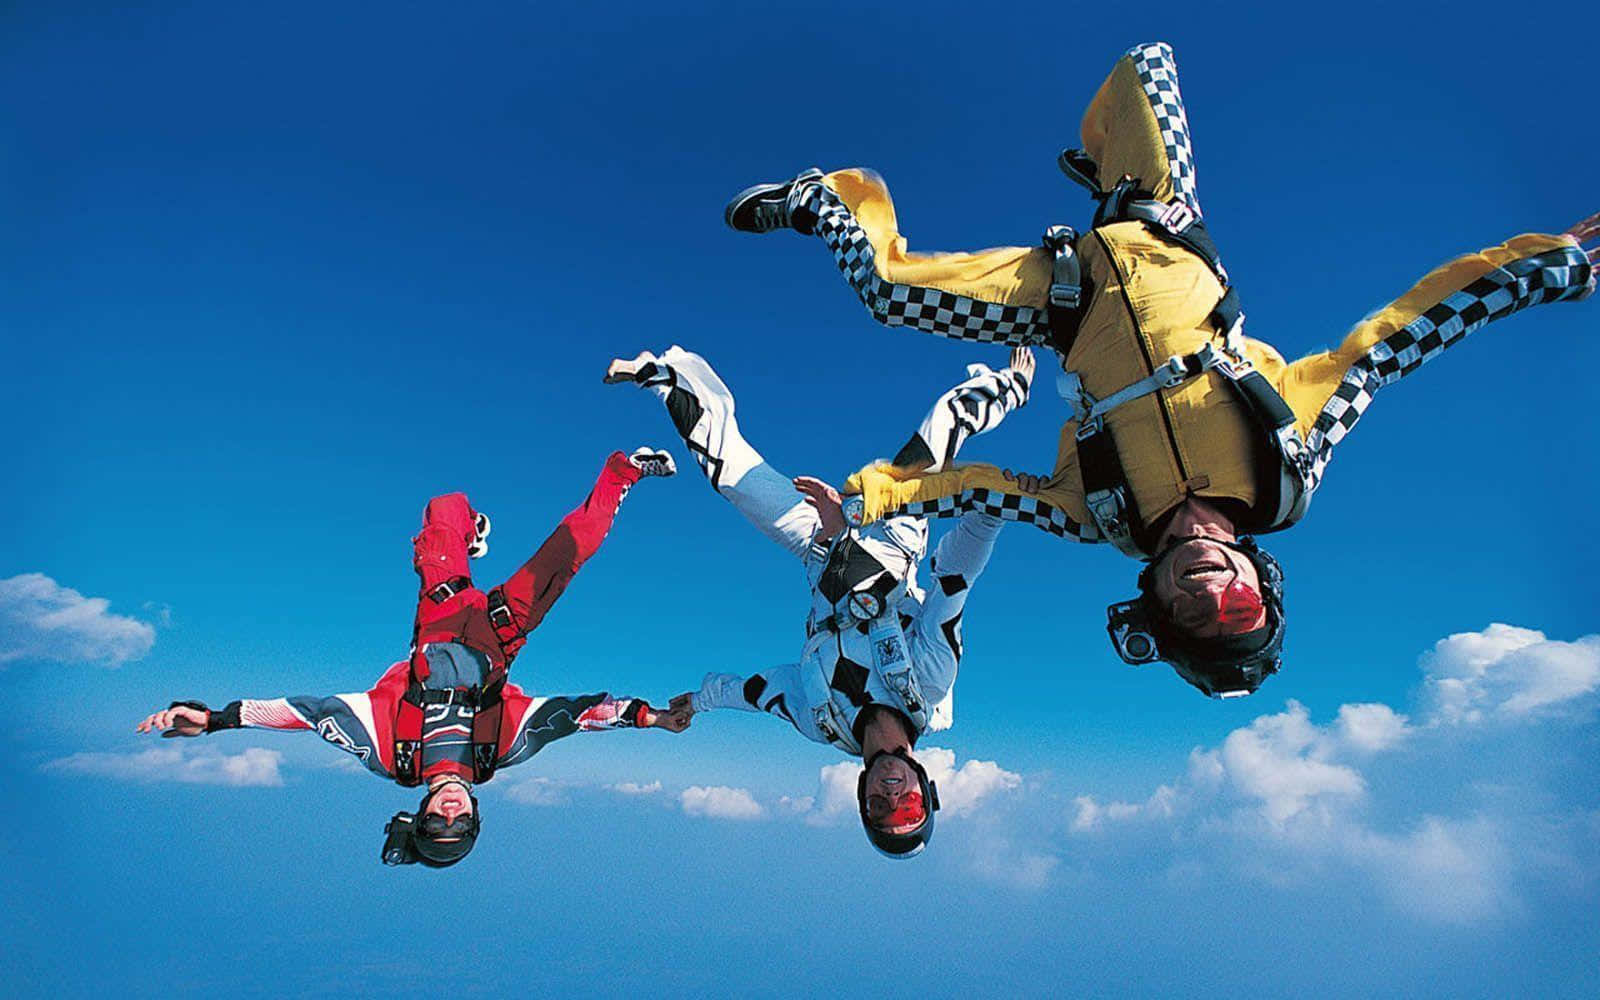 Three People In A Skydiving Outfit Flying In The Air